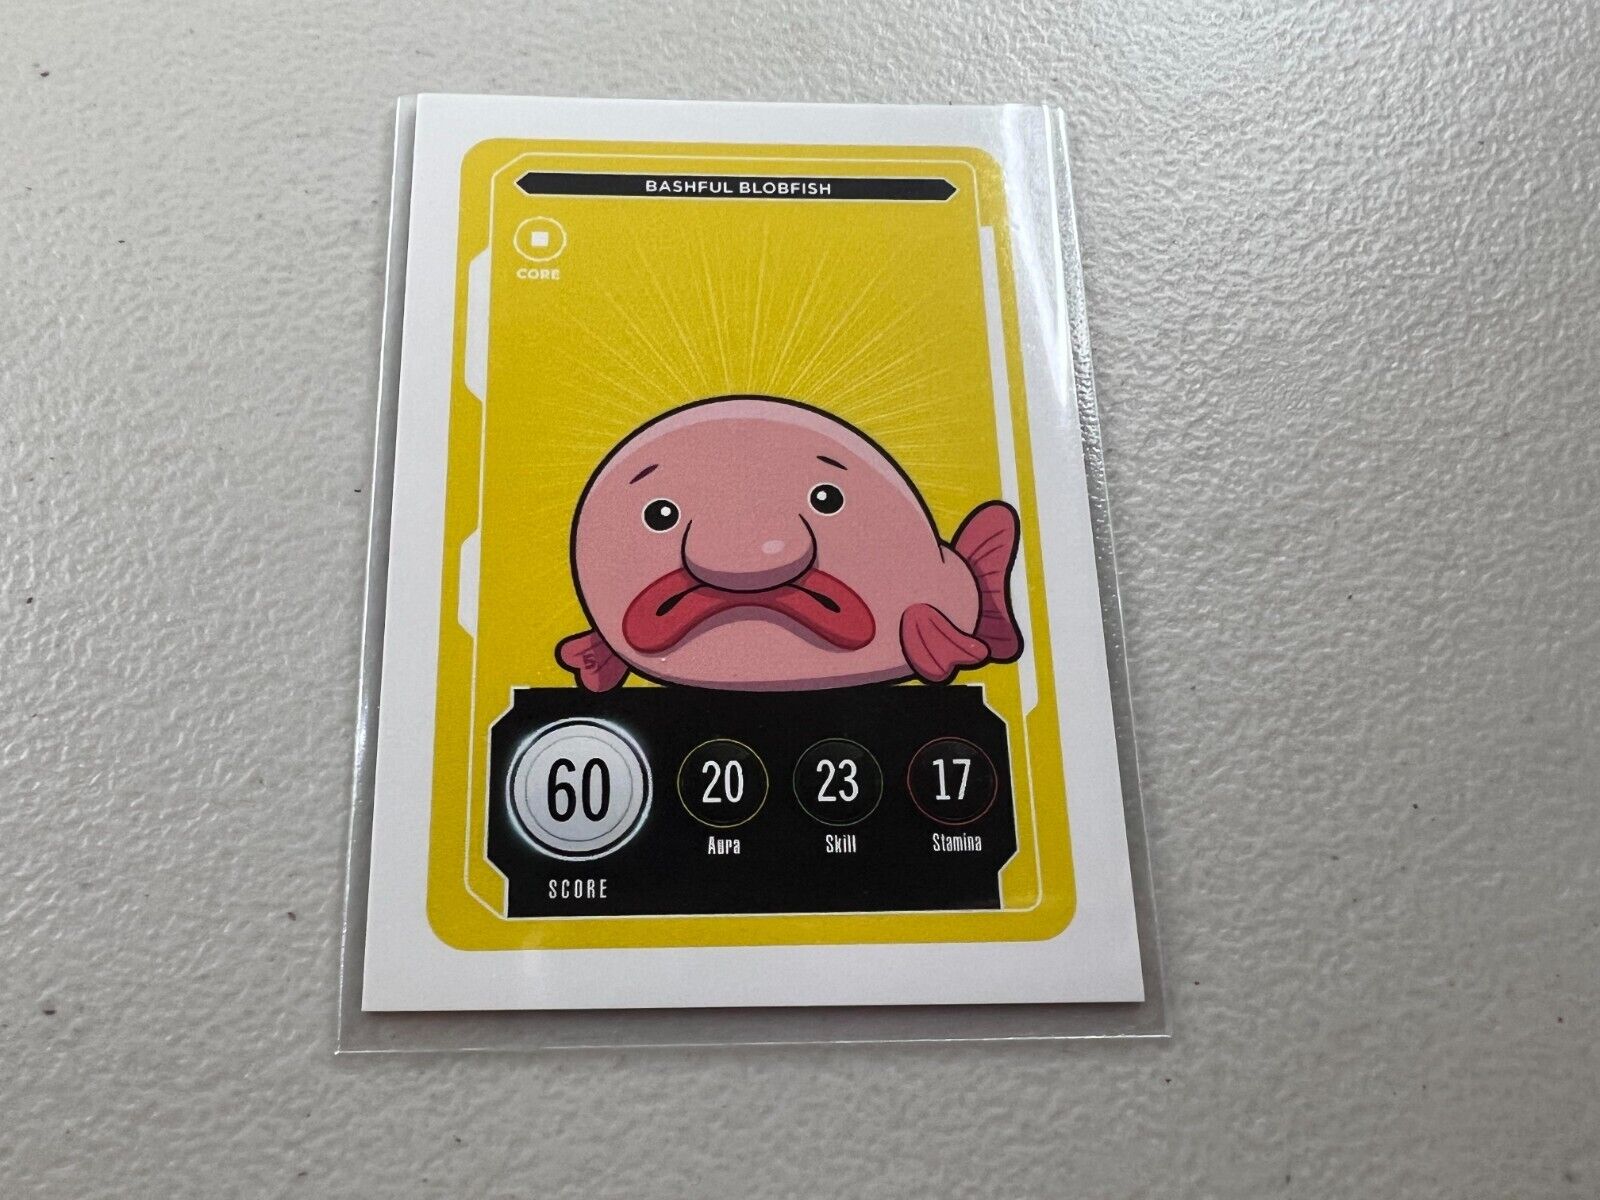 VeeFriends Bashful Blobfish Series 2 Core Card Compete and Collect Gary Vee